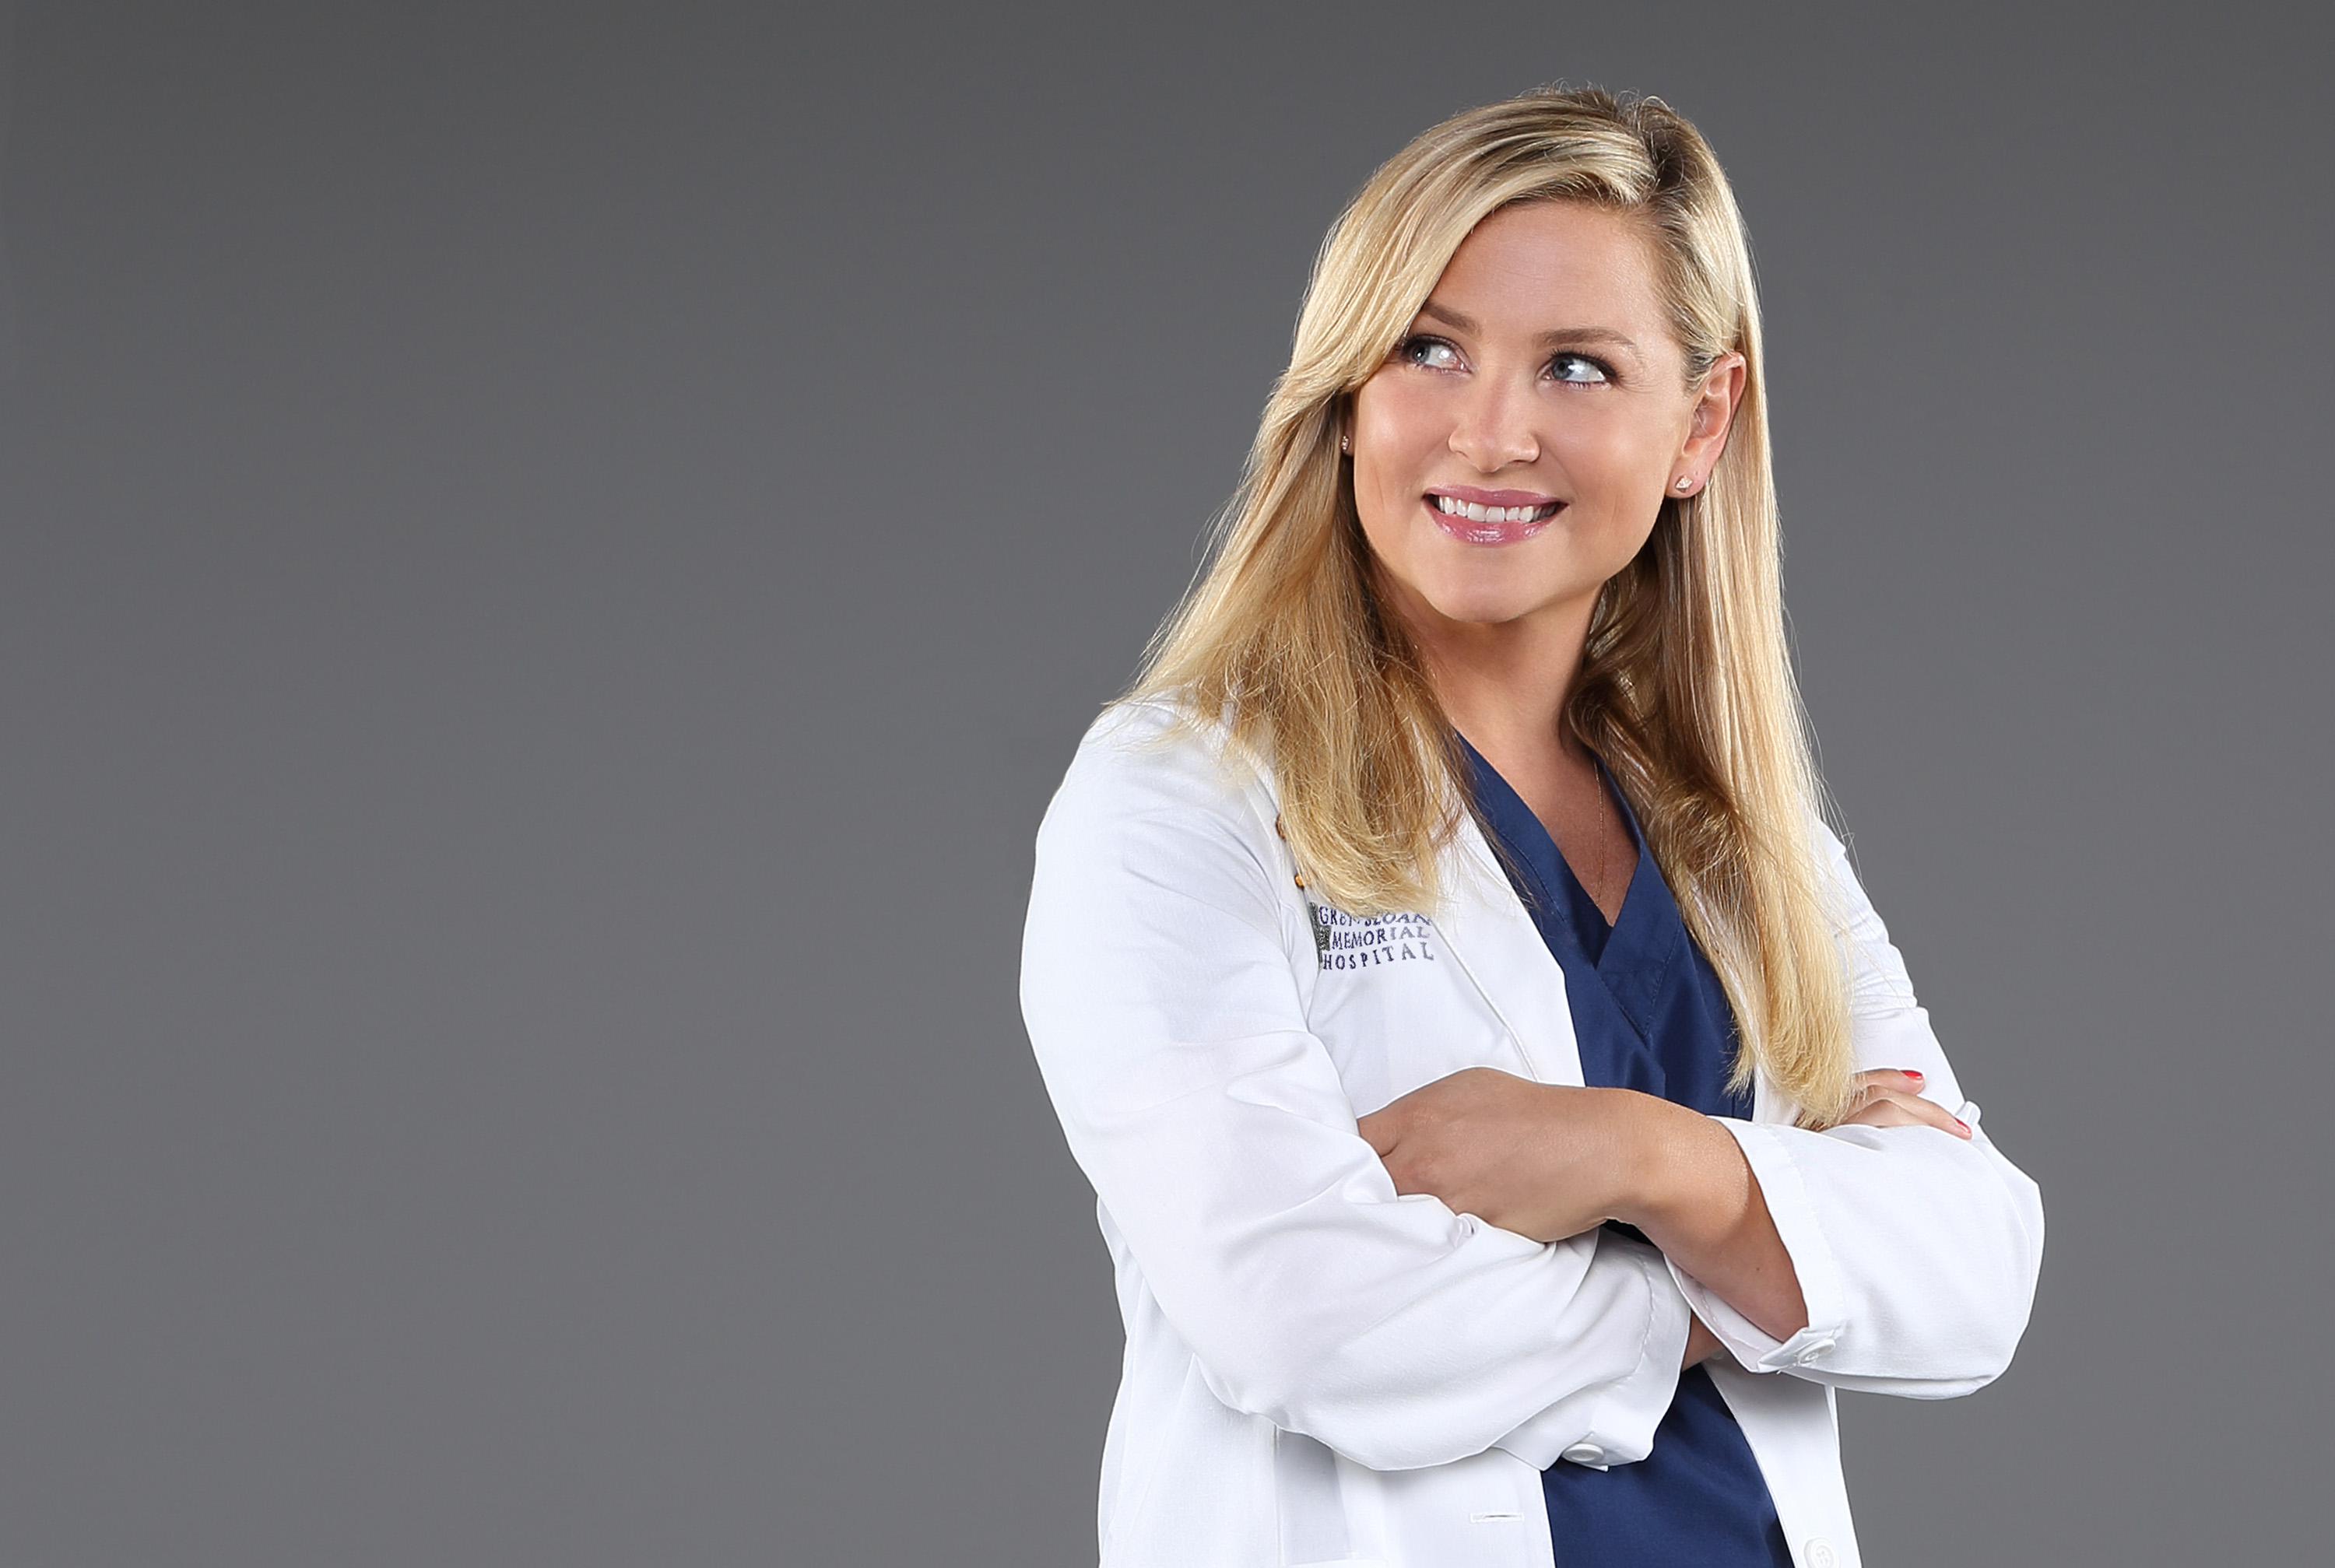 Greys Anatomy Season 13 Spoilers: The Hospital Ices Out 